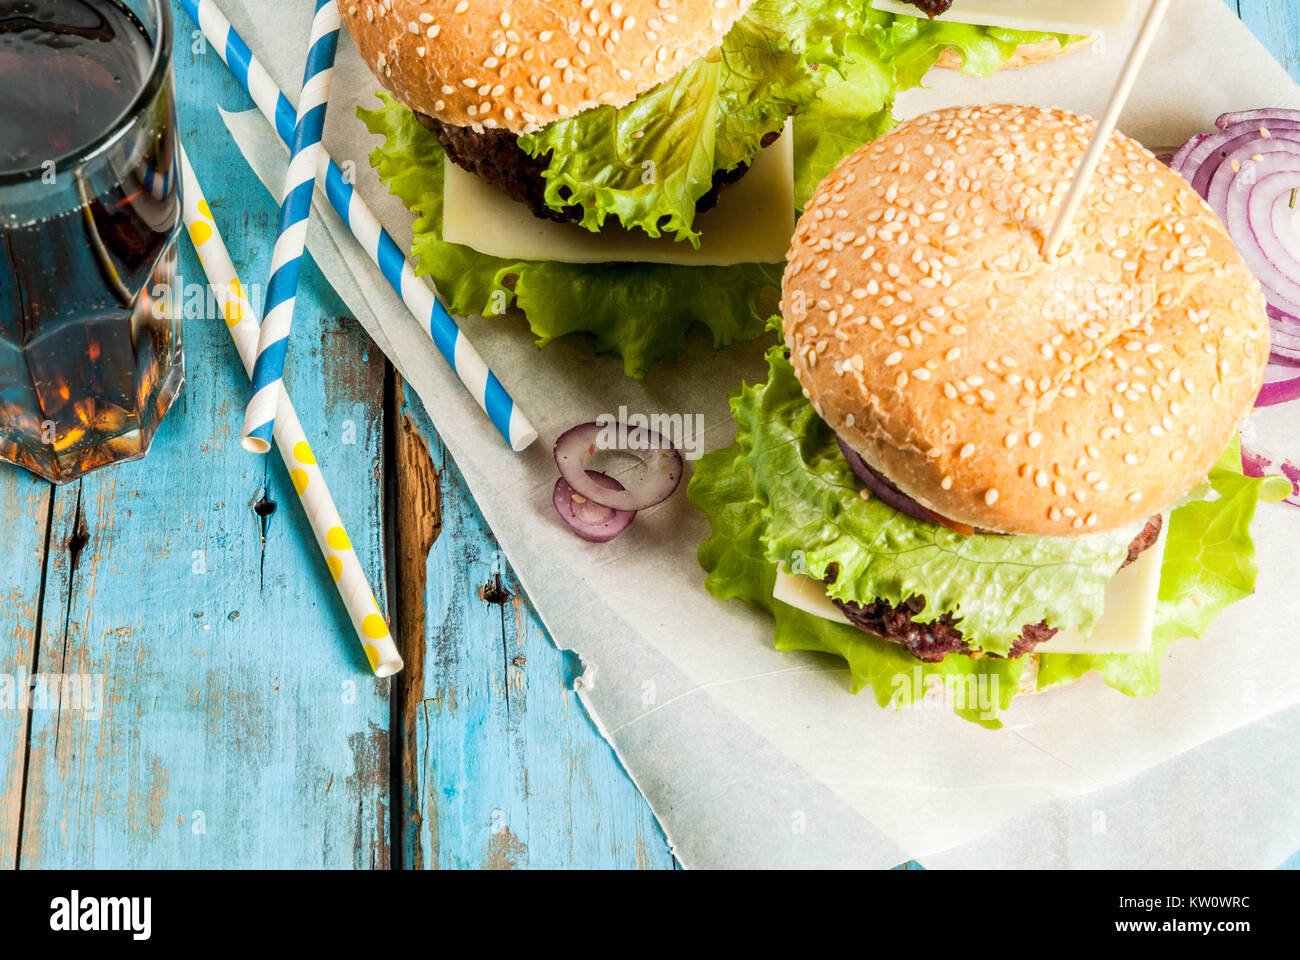 Picnic, Fast food. Unhealthy food. Delicious Fresh Tasty Burgers with ...